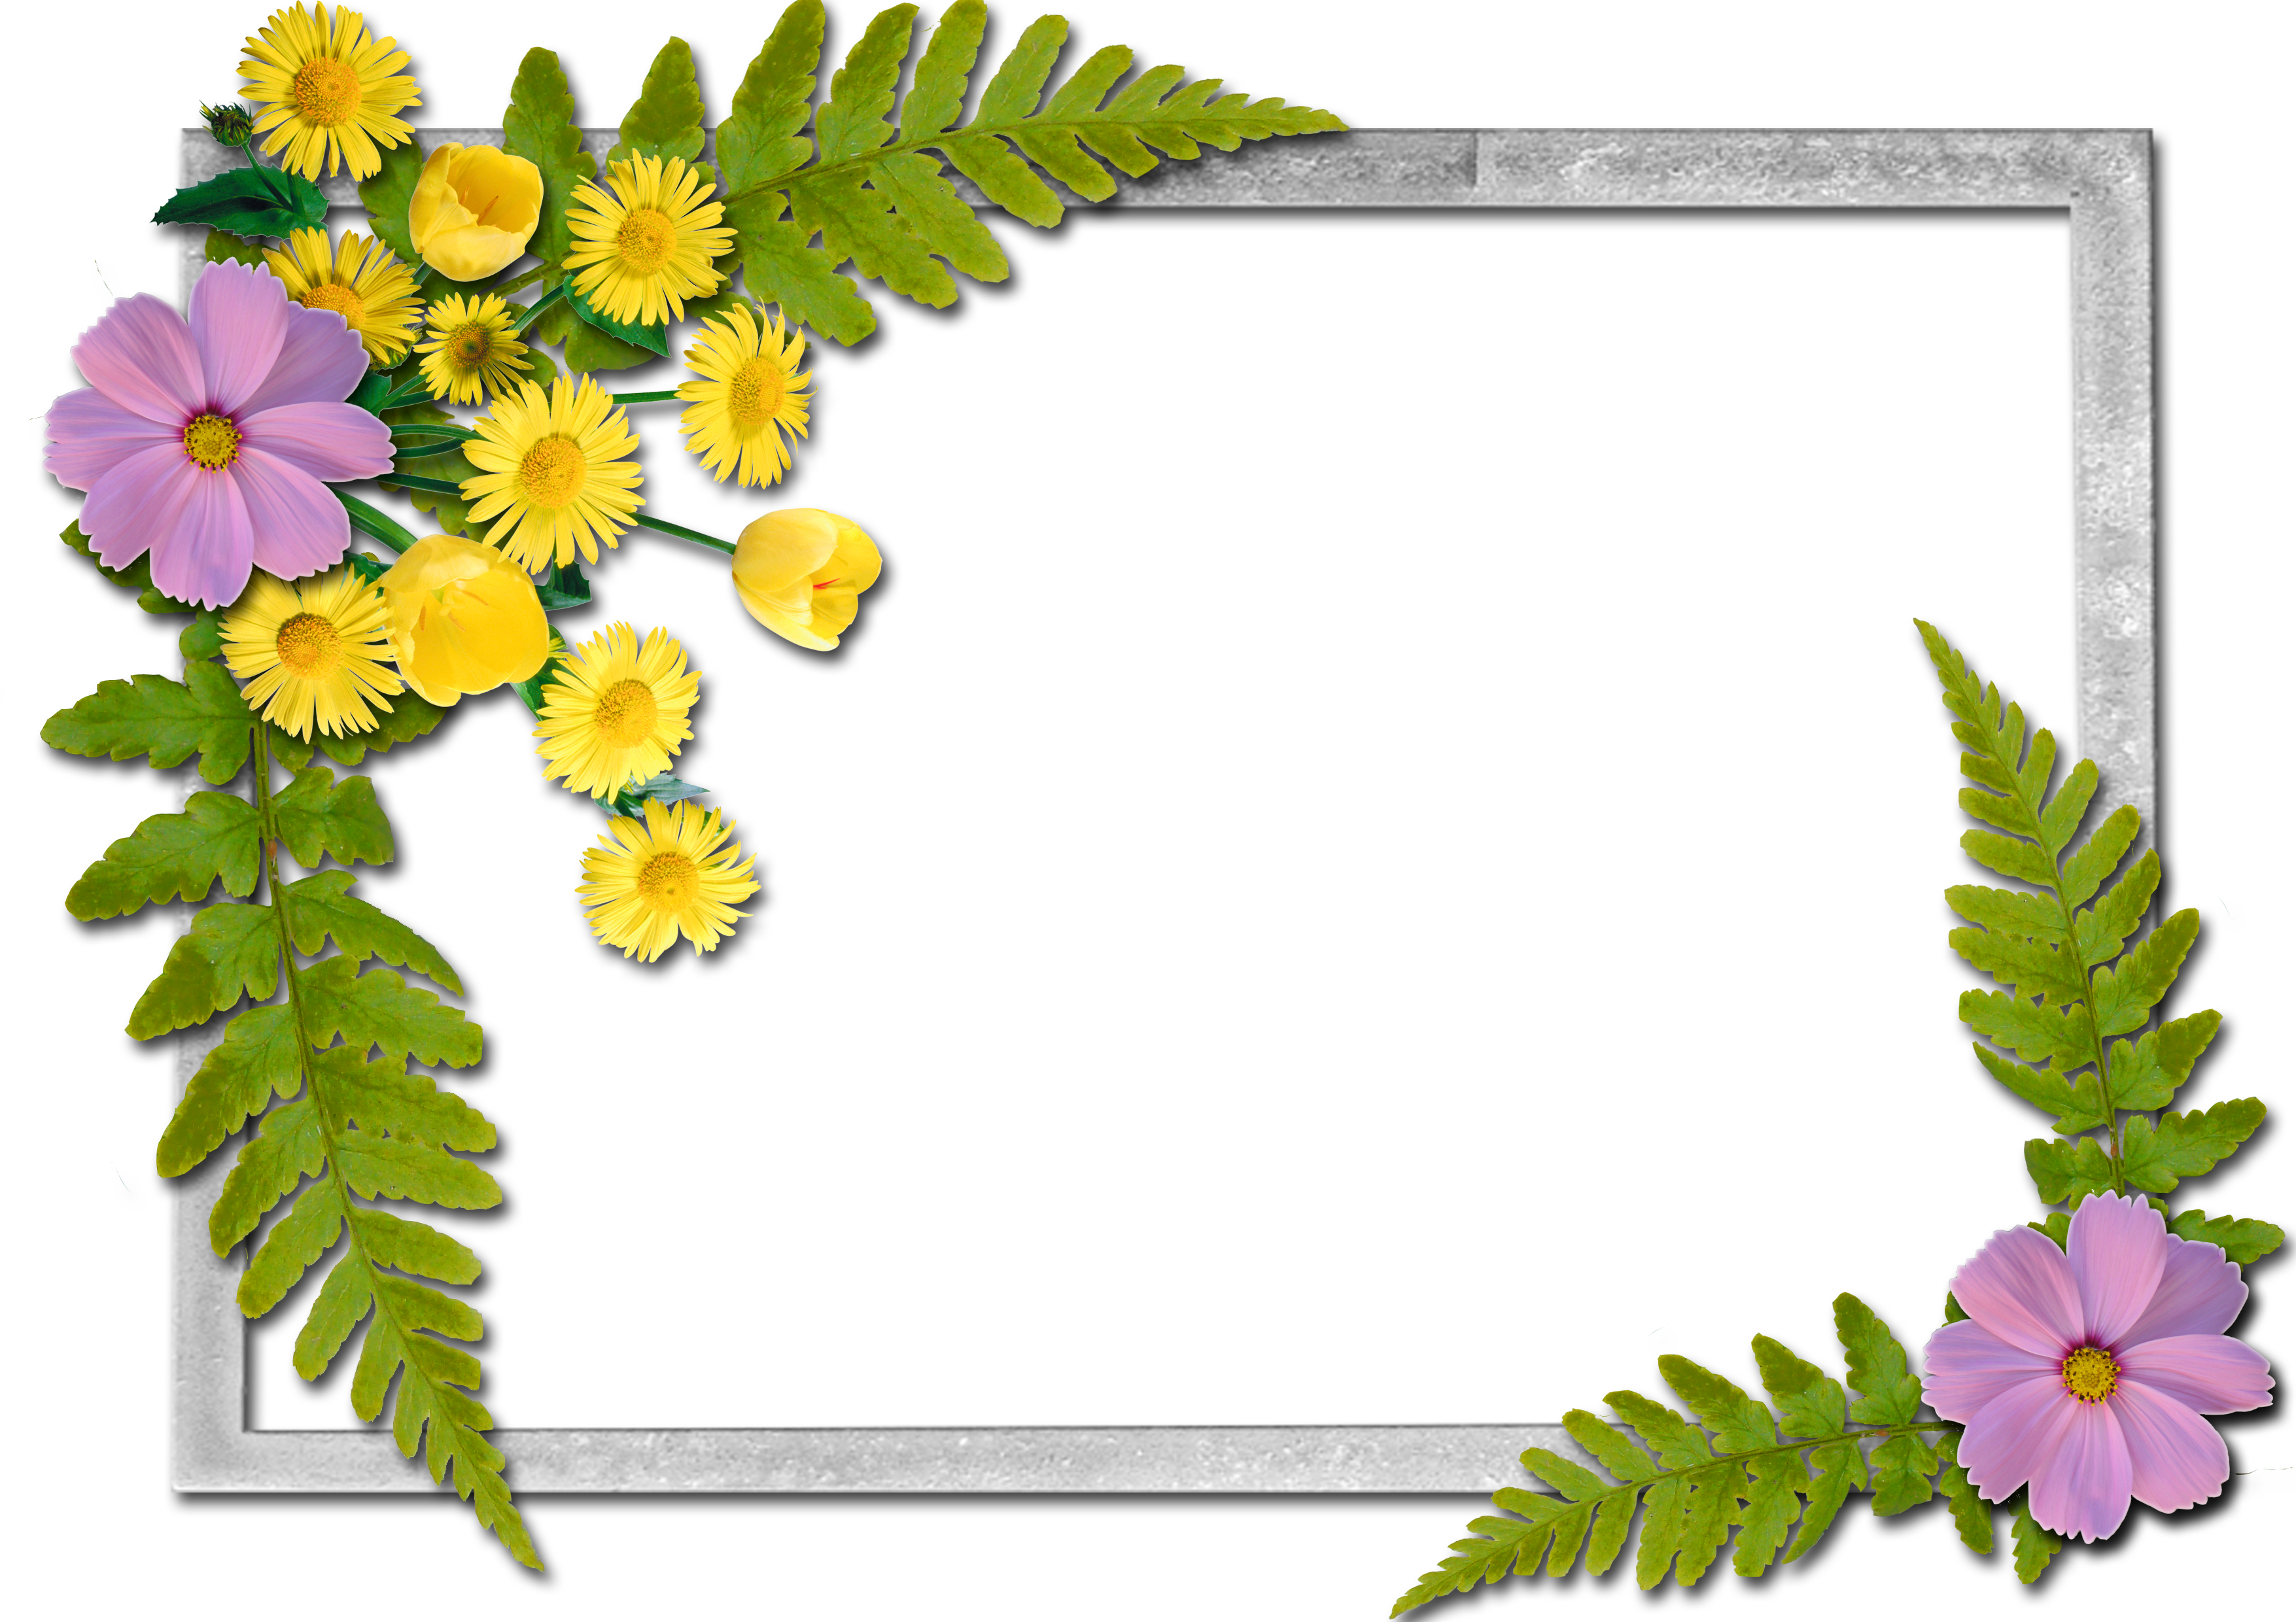 Flowers_frame (15).png?m=1345158000